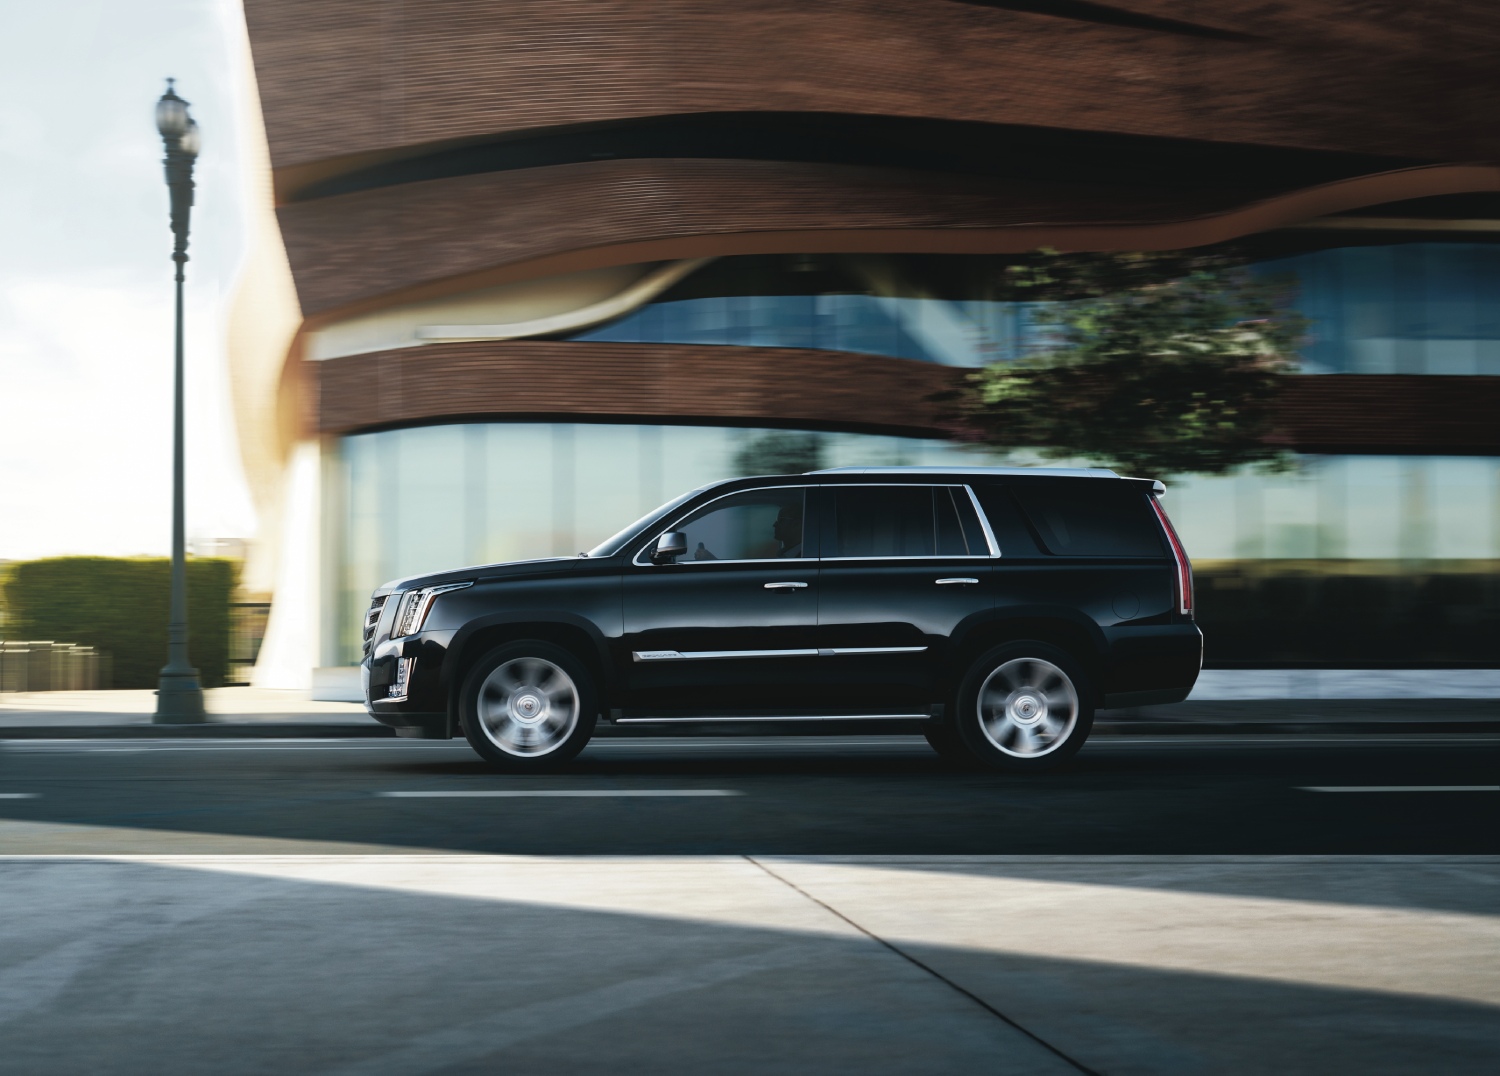 A 2015 Cadillac Escalade driving on the road